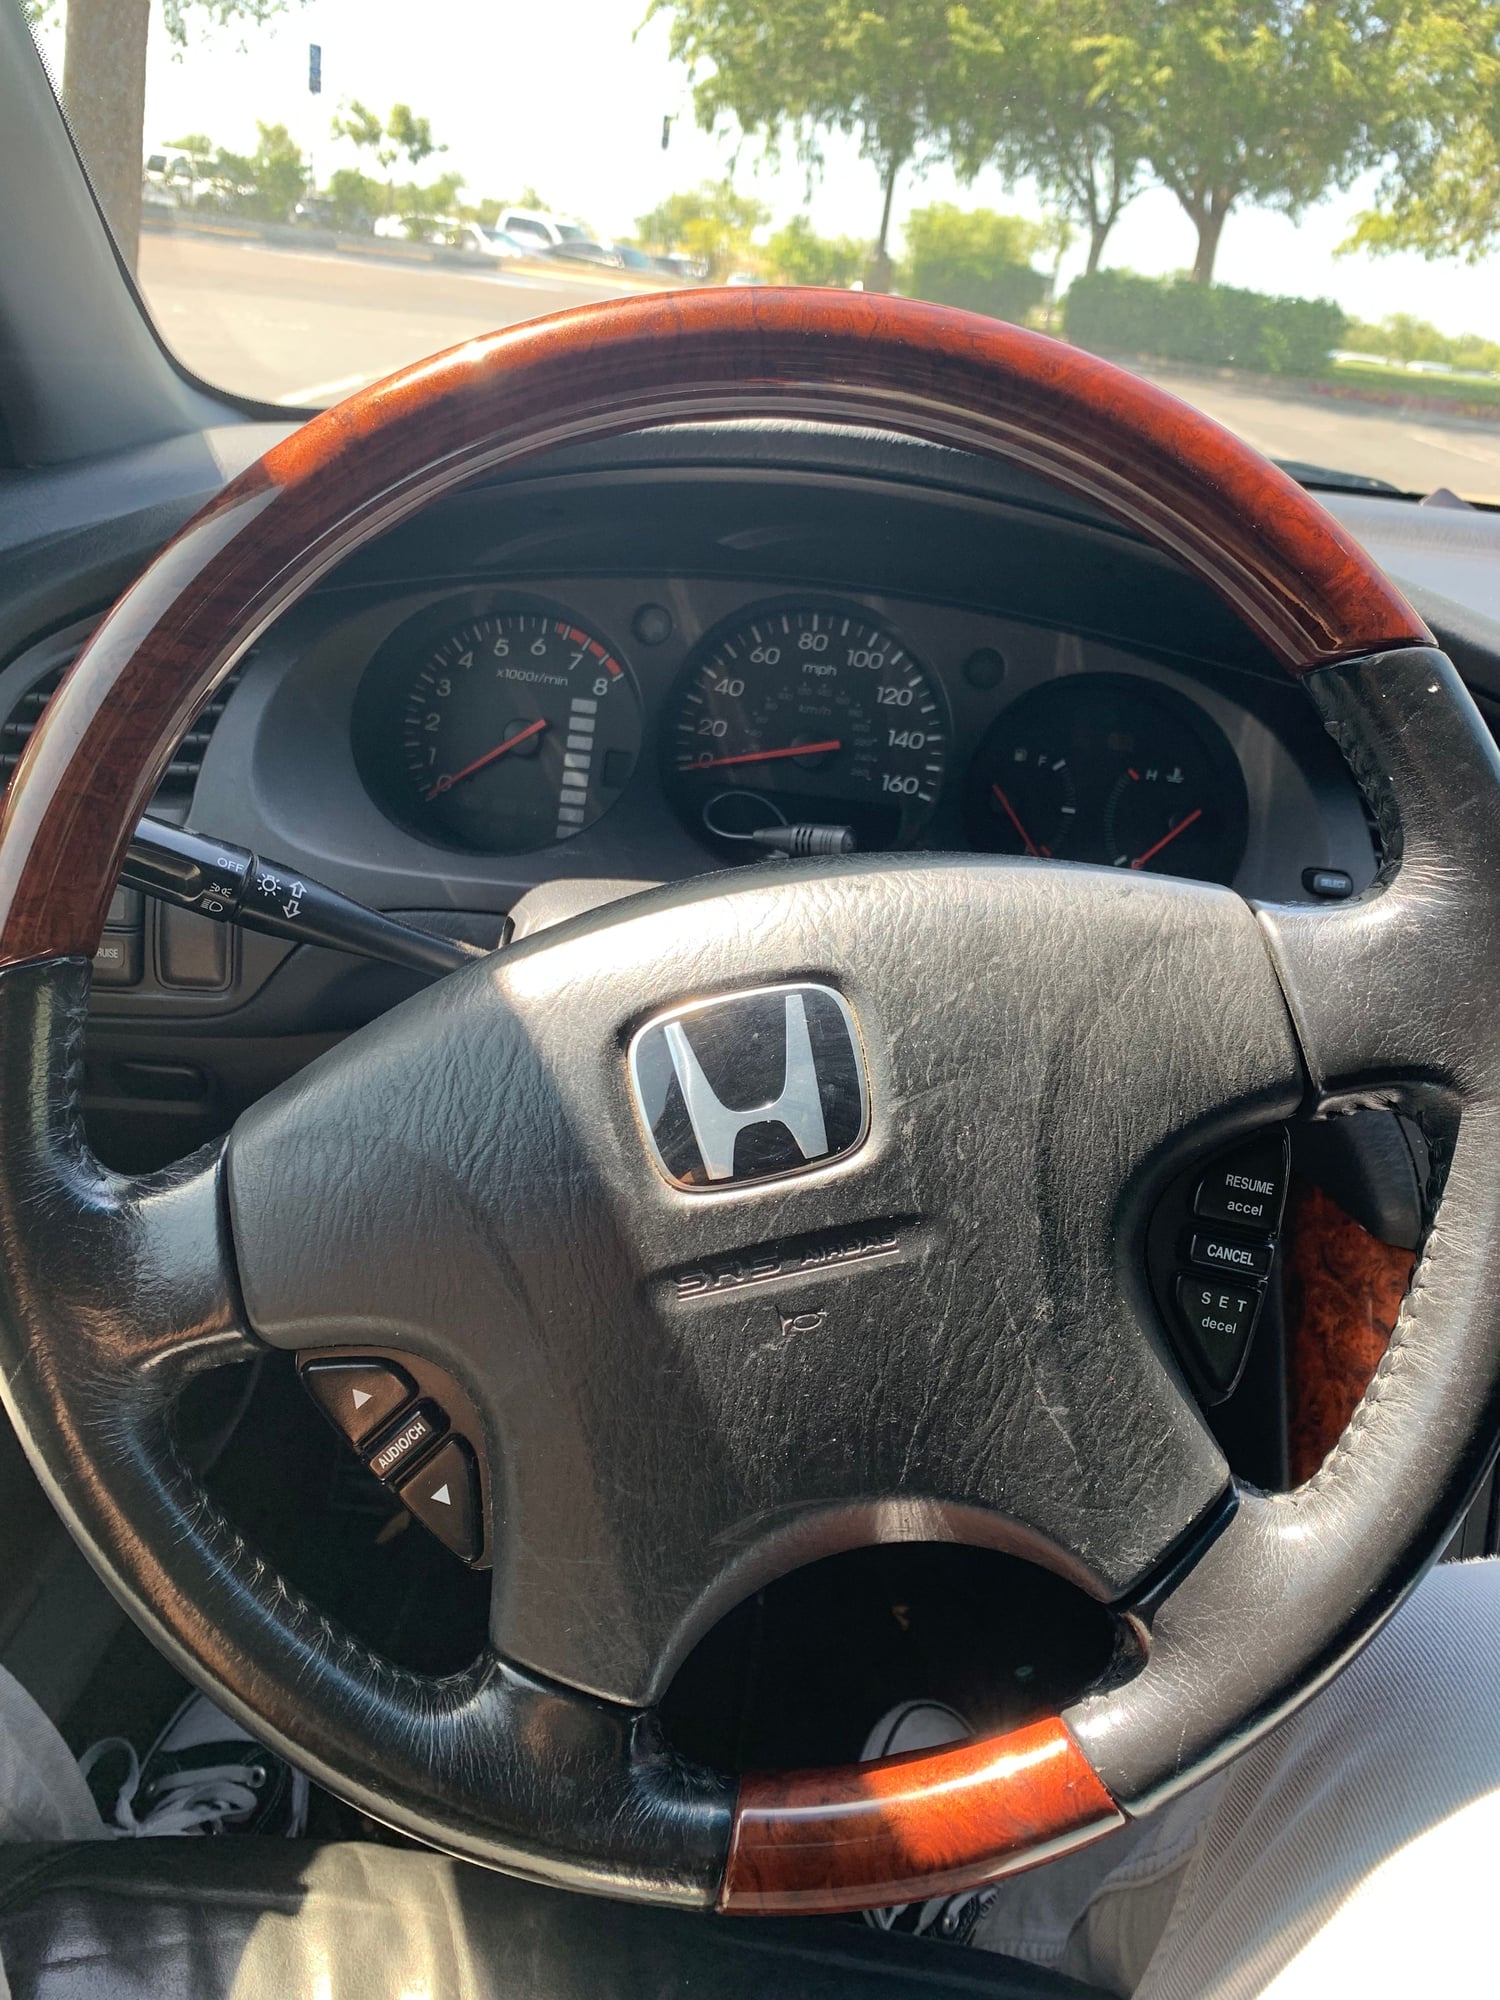 Interior/Upholstery - FS: Wood grain steering wheels 2G TL - Used - 1999 to 2003 Acura TL - Sacramento, CA 95828, United States